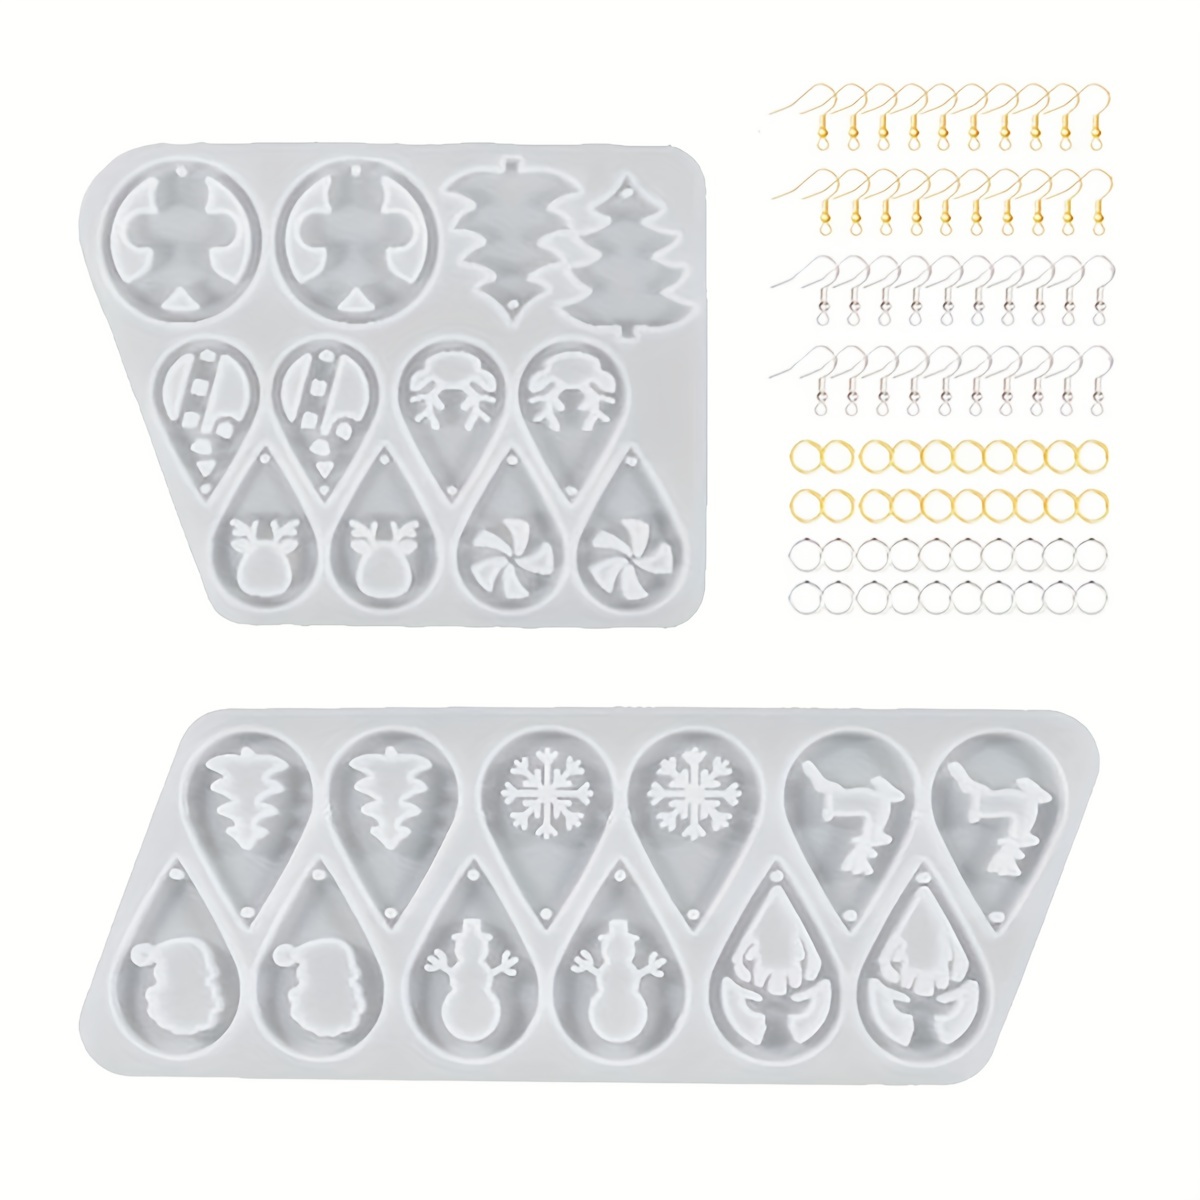  12 Pair Christmas Earring Mold Resin Silicone with Earring  Hooks and Jump Ring Earring Casting Mold for Christmas Tree Elk Snowflake  Resin Earring Keychains Epoxy Craft Xmas DIY Jewelry Making Kit 